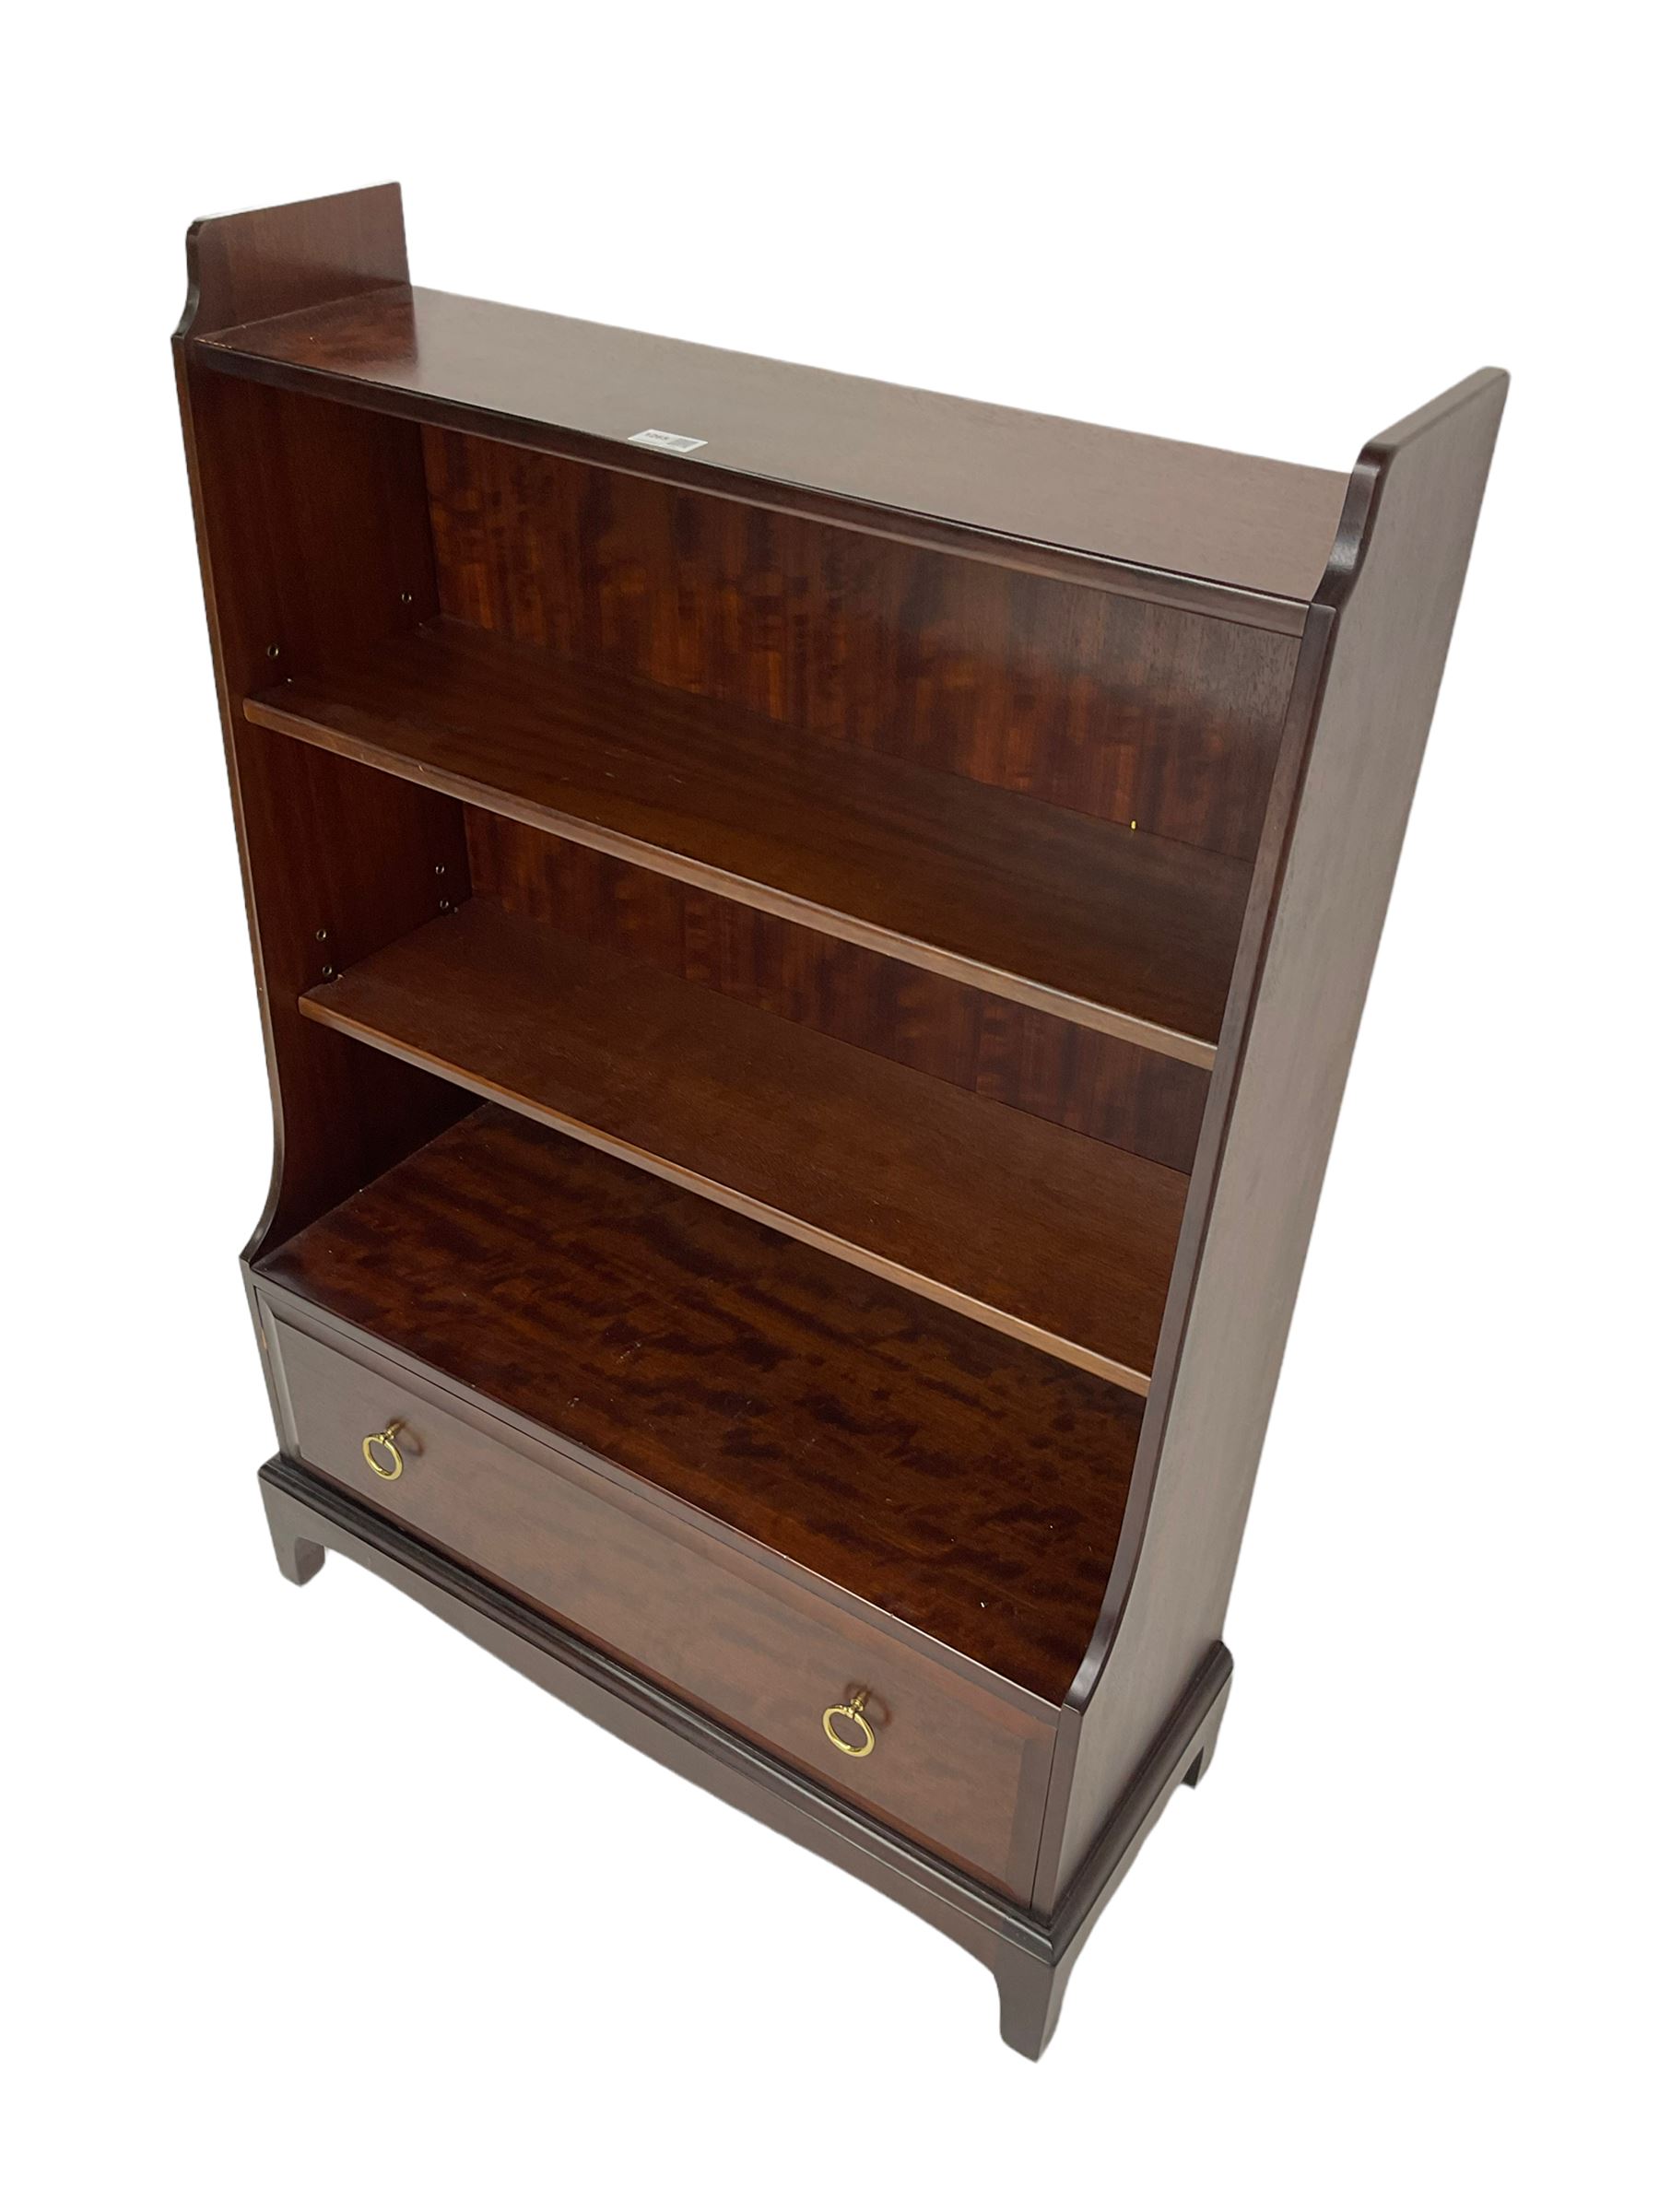 Stag Minstrel - mahogany open bookcase with drawer - Image 6 of 6